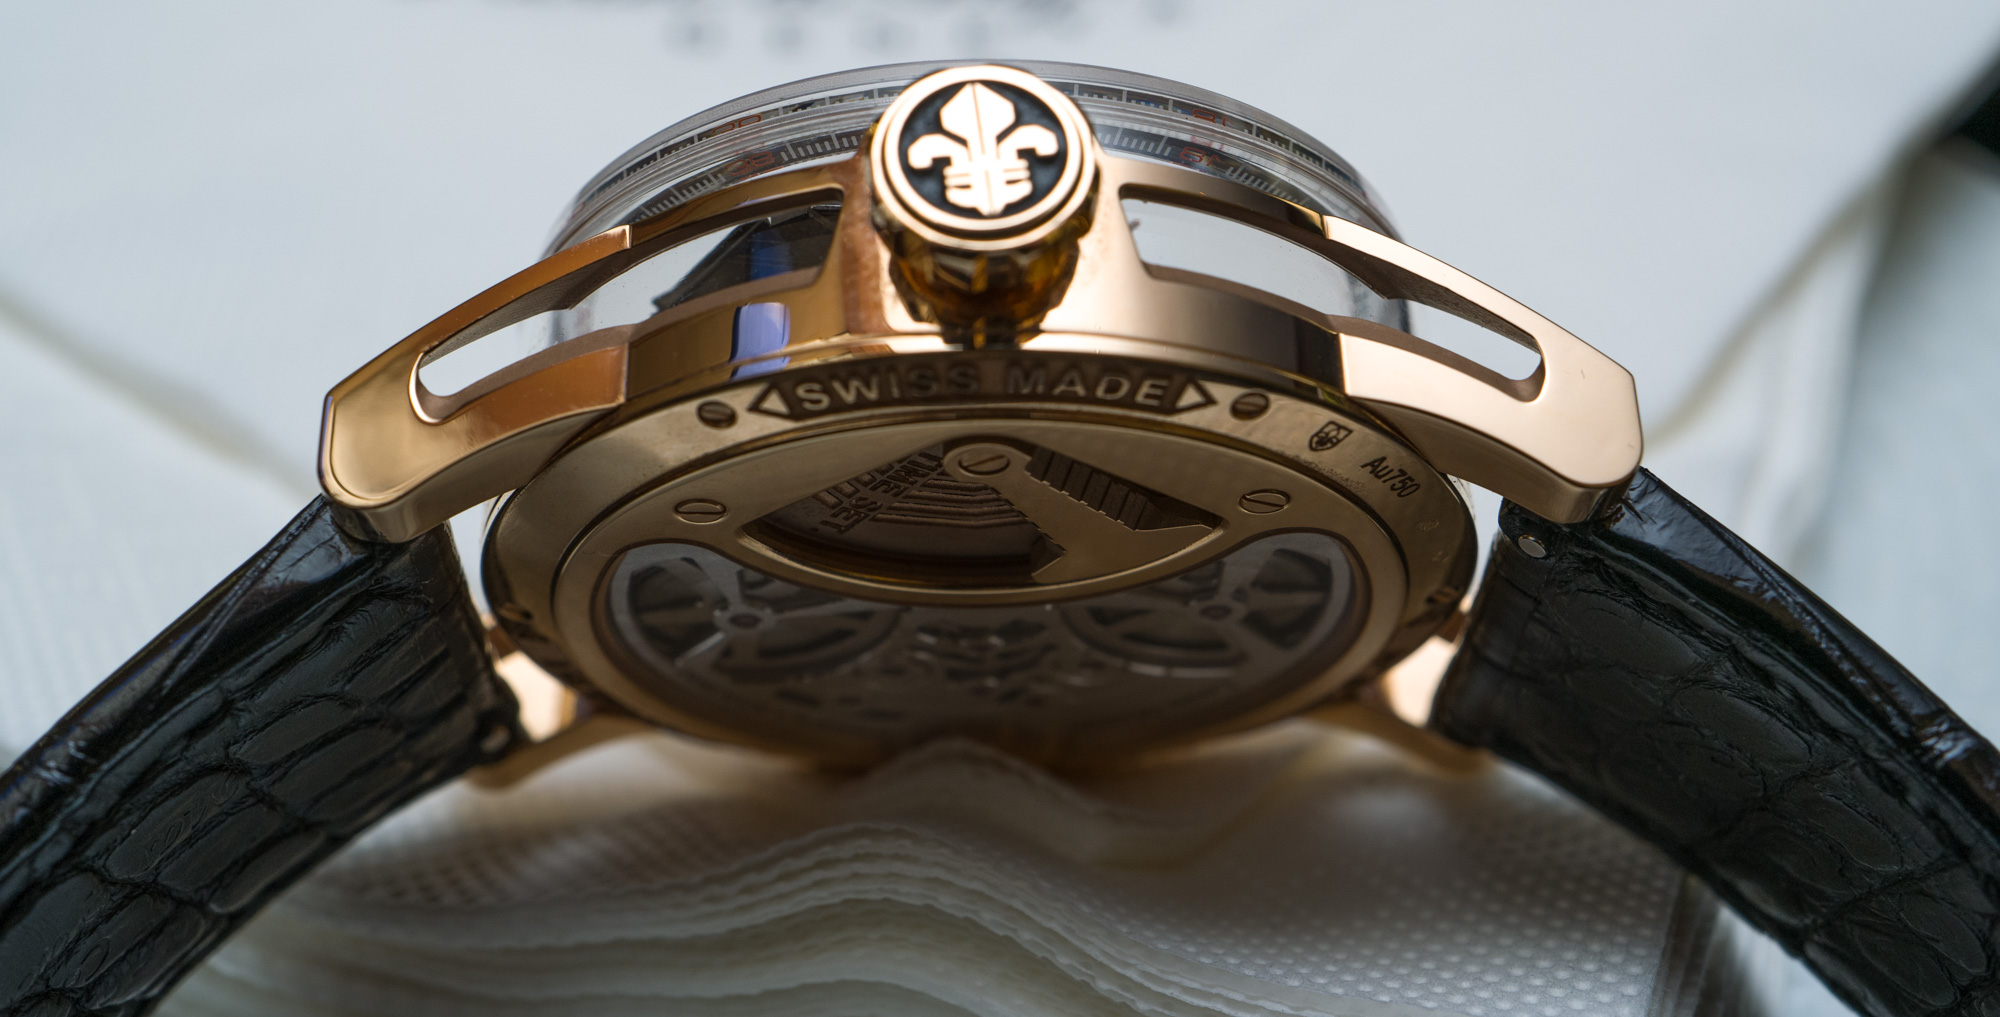 Louis Moinet gathers supplies from all over the galaxy for latest